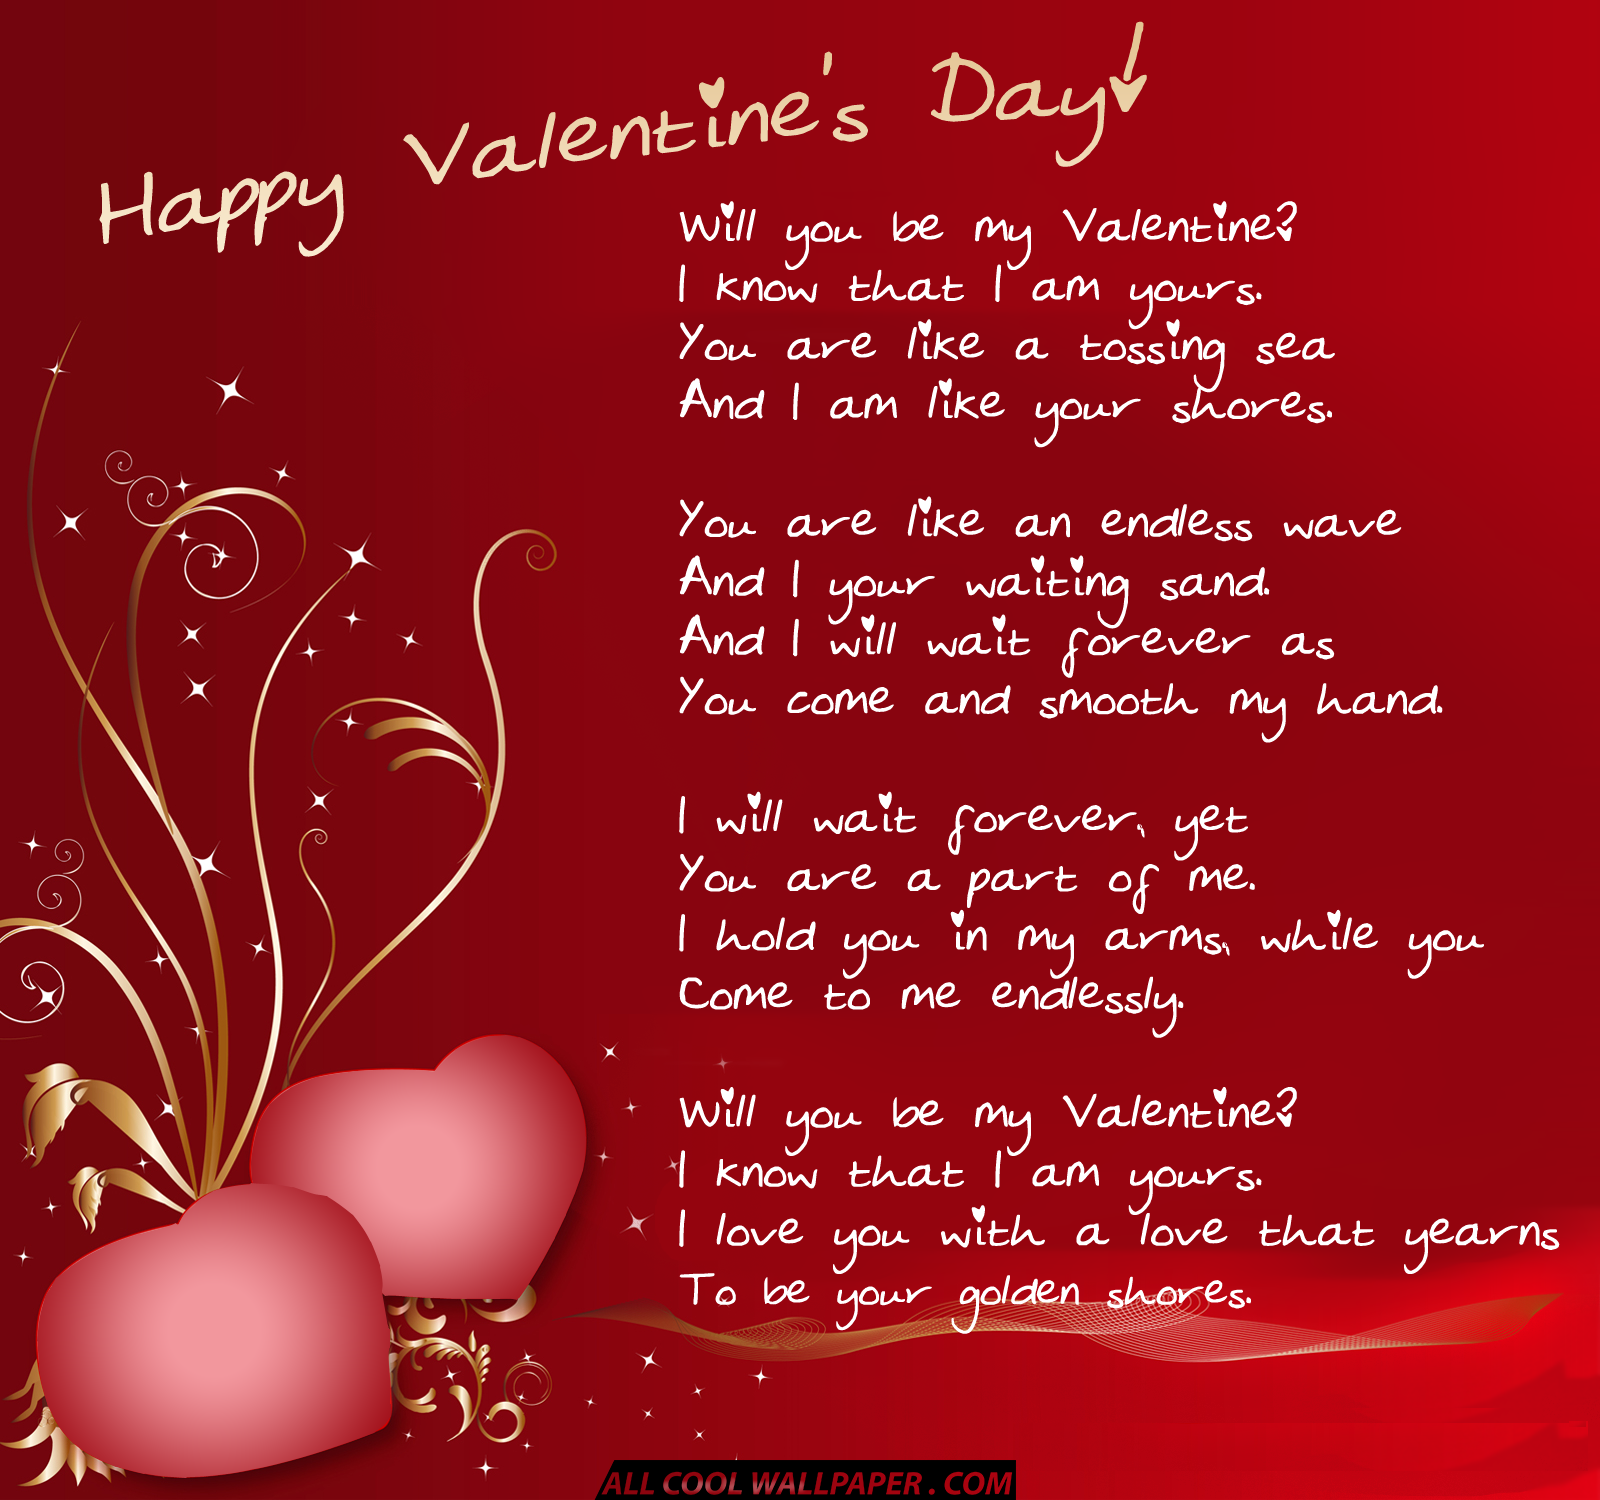 Heart Touching Valentines Day Poem Day Specials. Valentines day poems, Valentine messages for boyfriend, Happy valentine day quotes